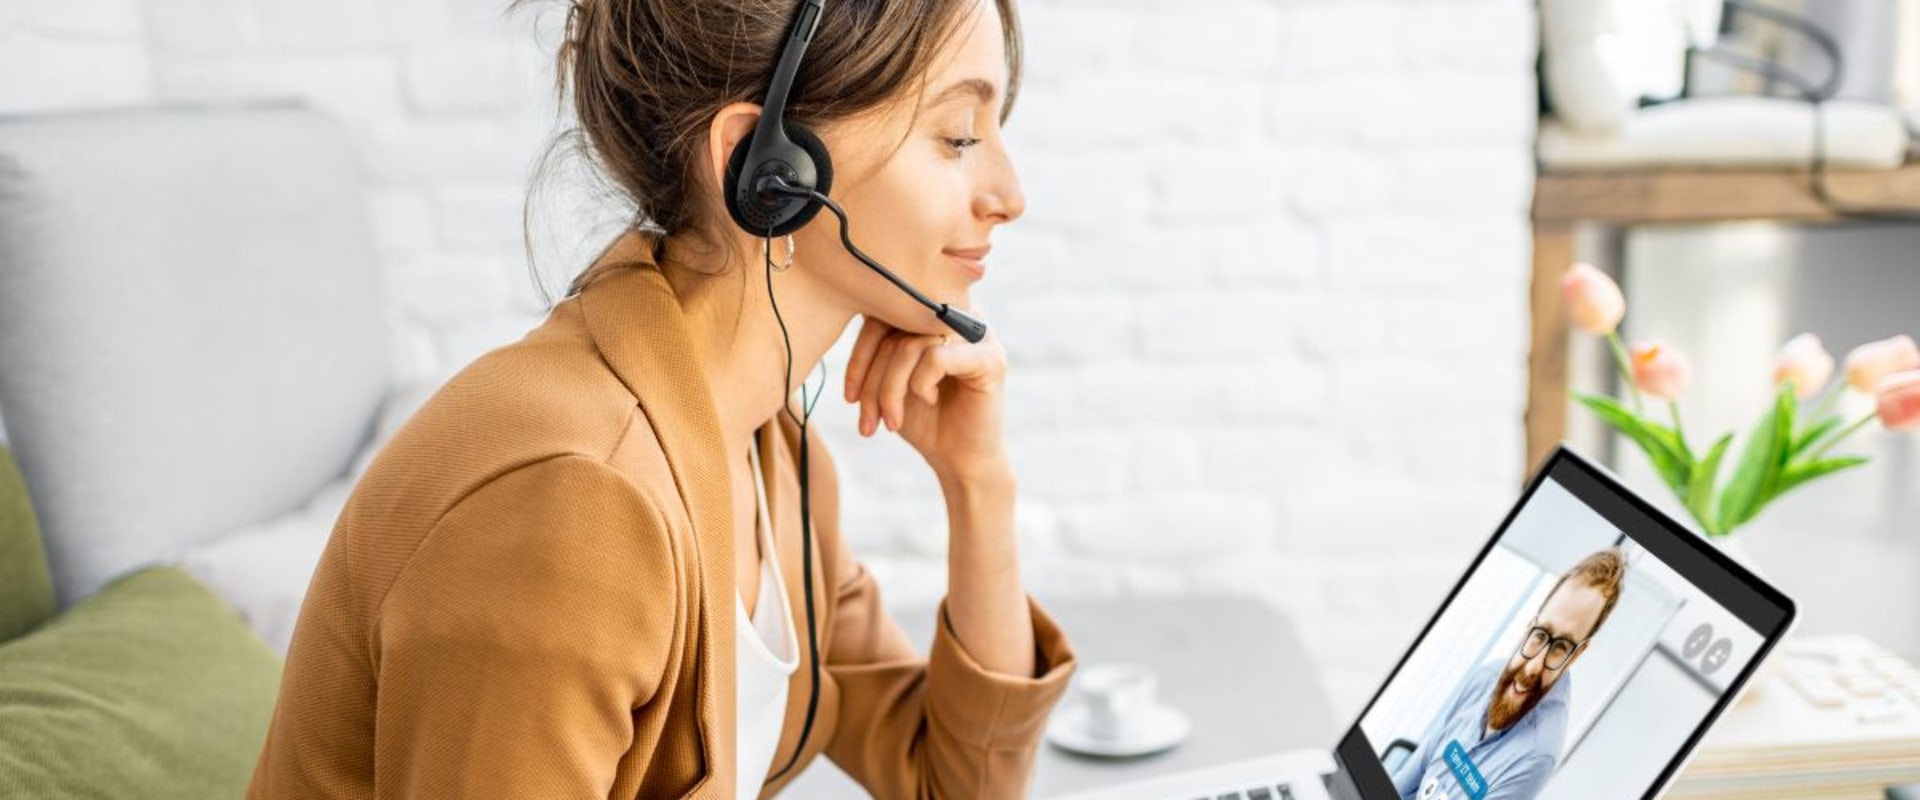 The Ultimate Guide to Choosing the Best VoIP Service for Small Businesses